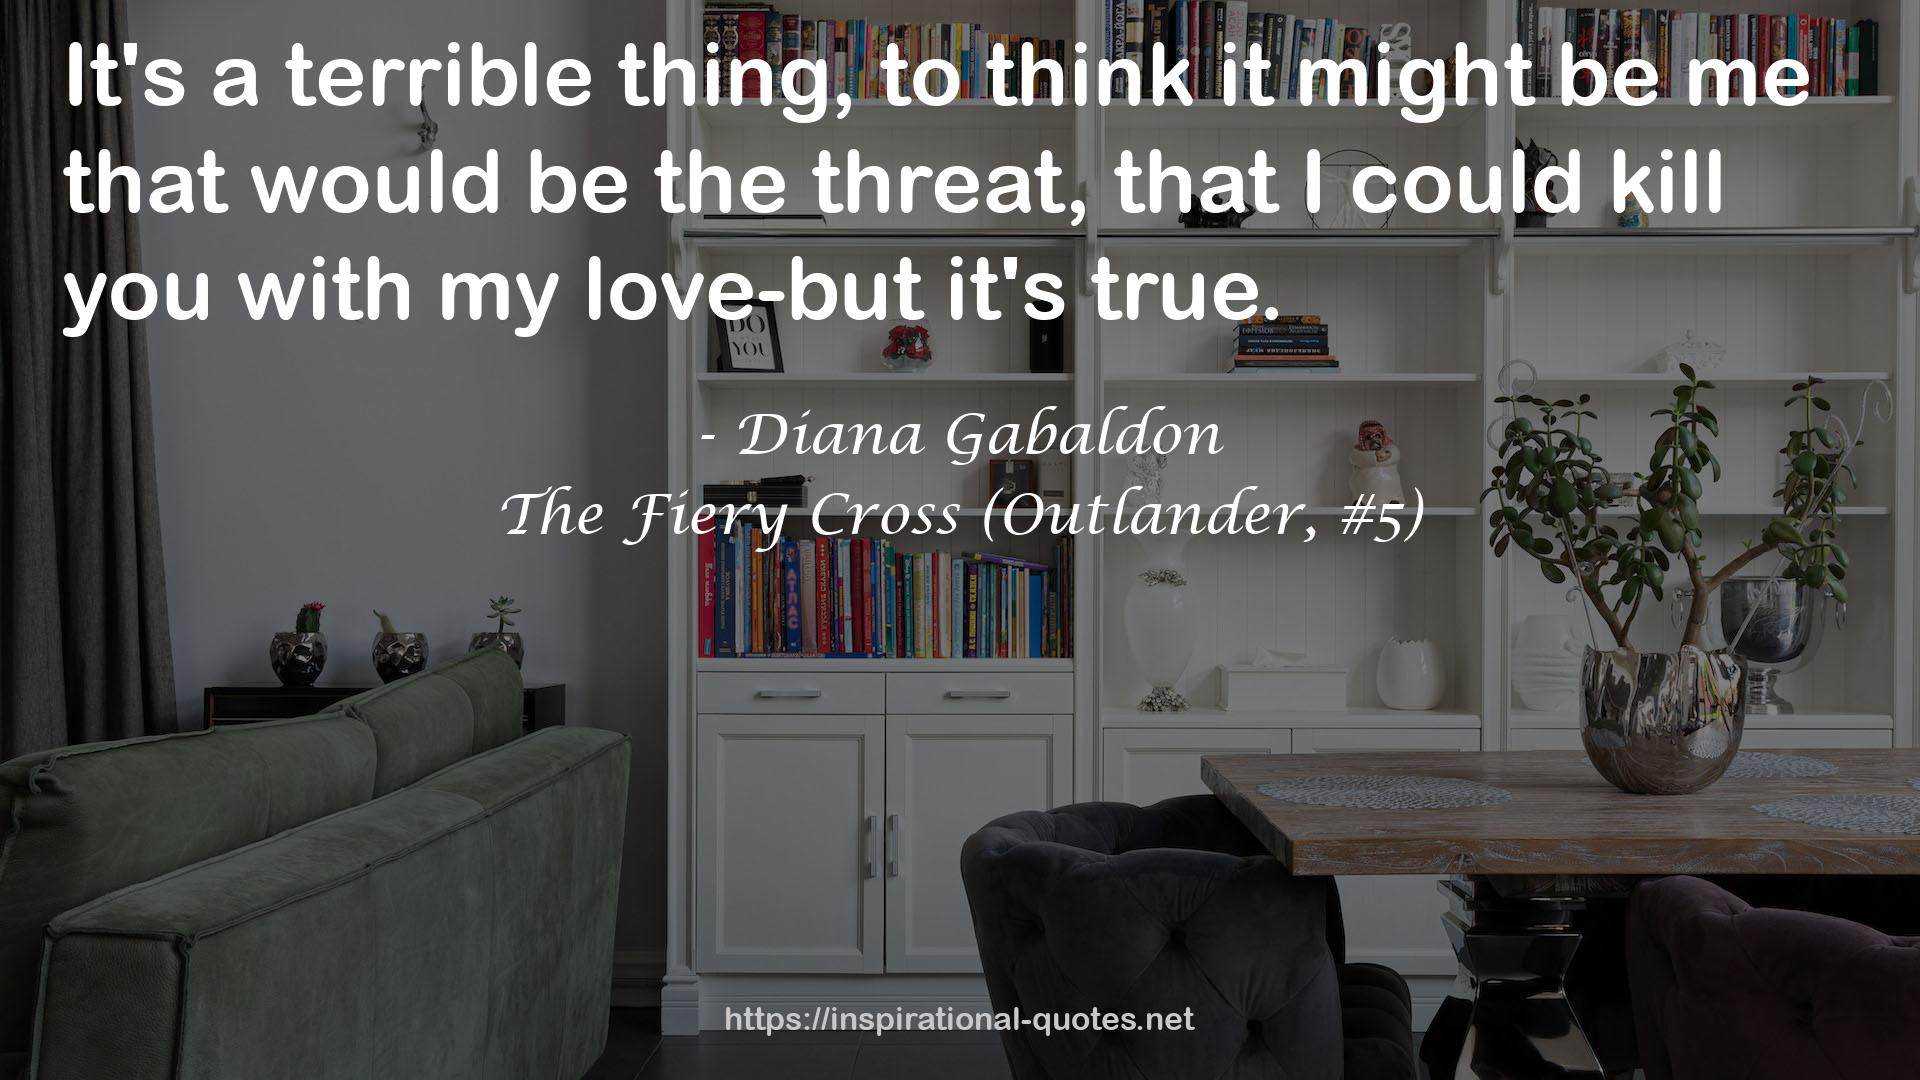 The Fiery Cross (Outlander, #5) QUOTES